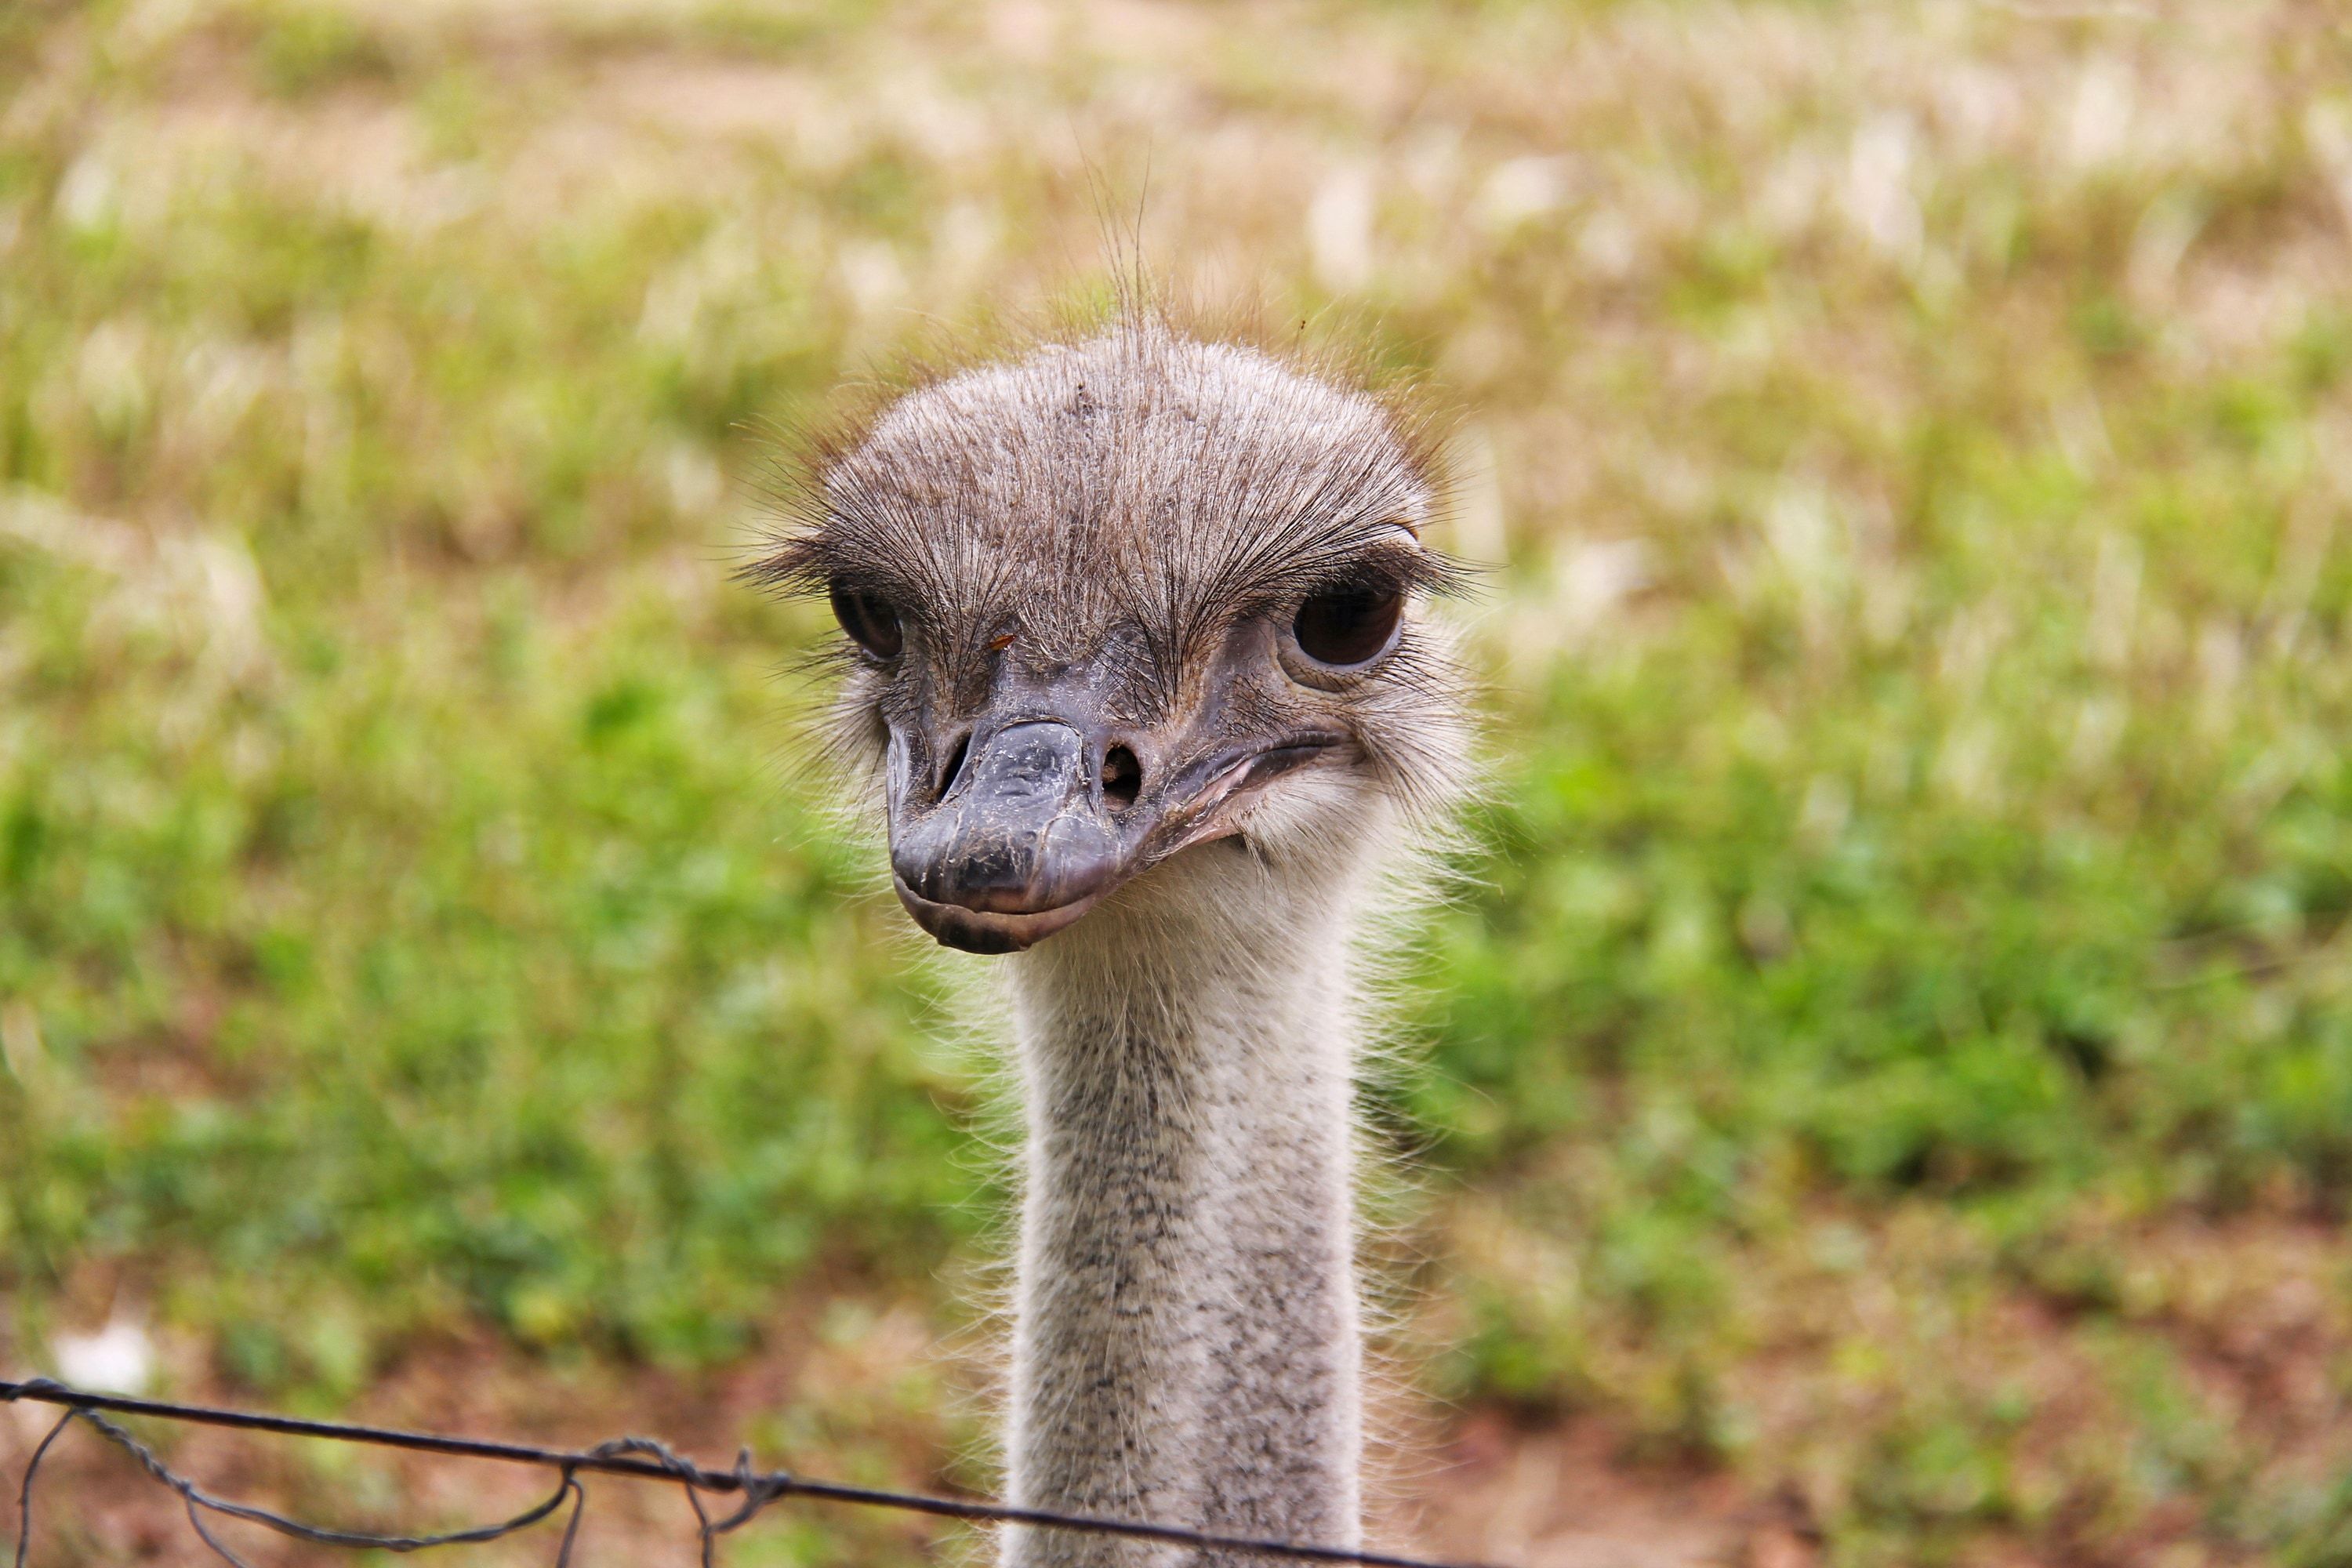 royalty free ostrich image